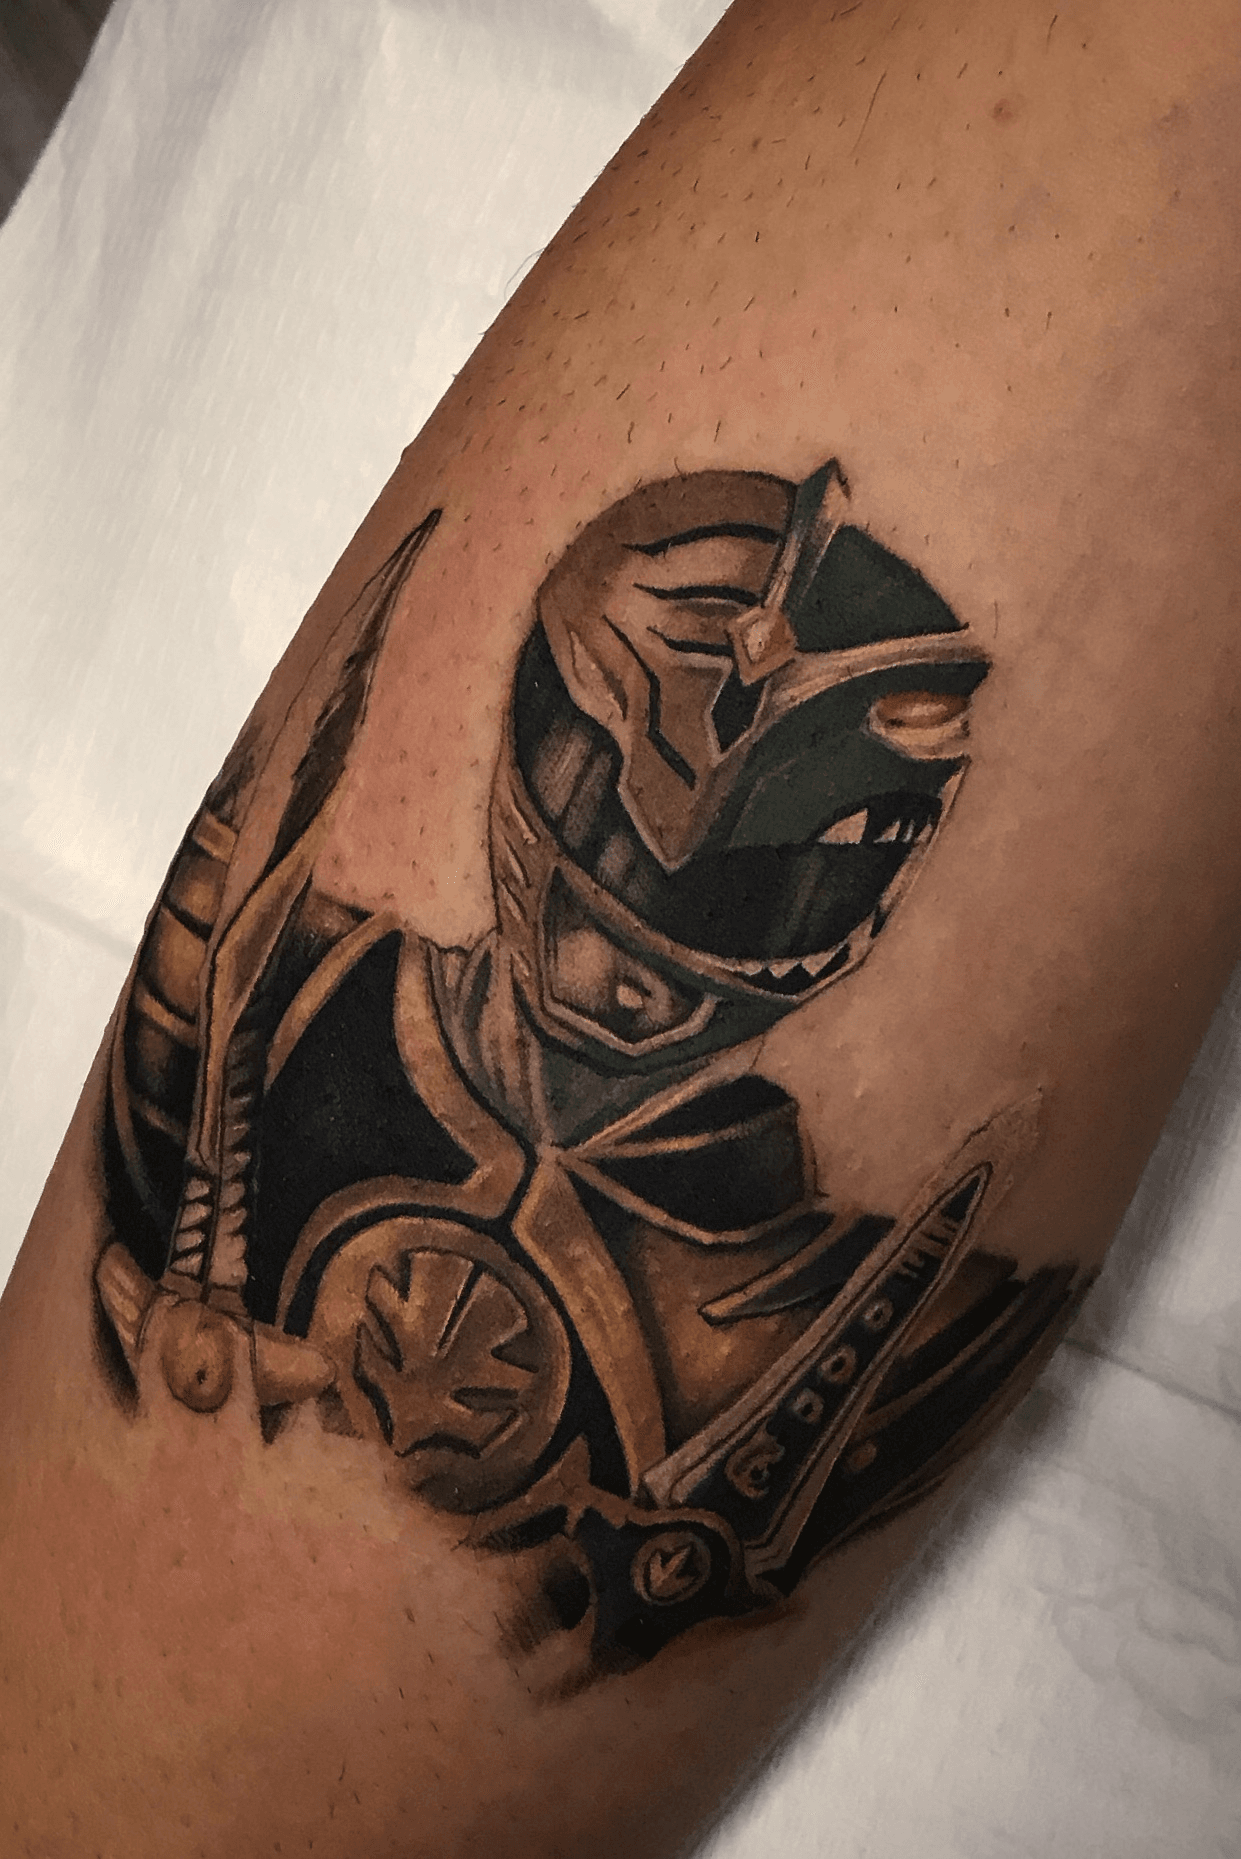 Video of the white ranger done by Ash this year   By Glowing Rose  Tattoos  Facebook